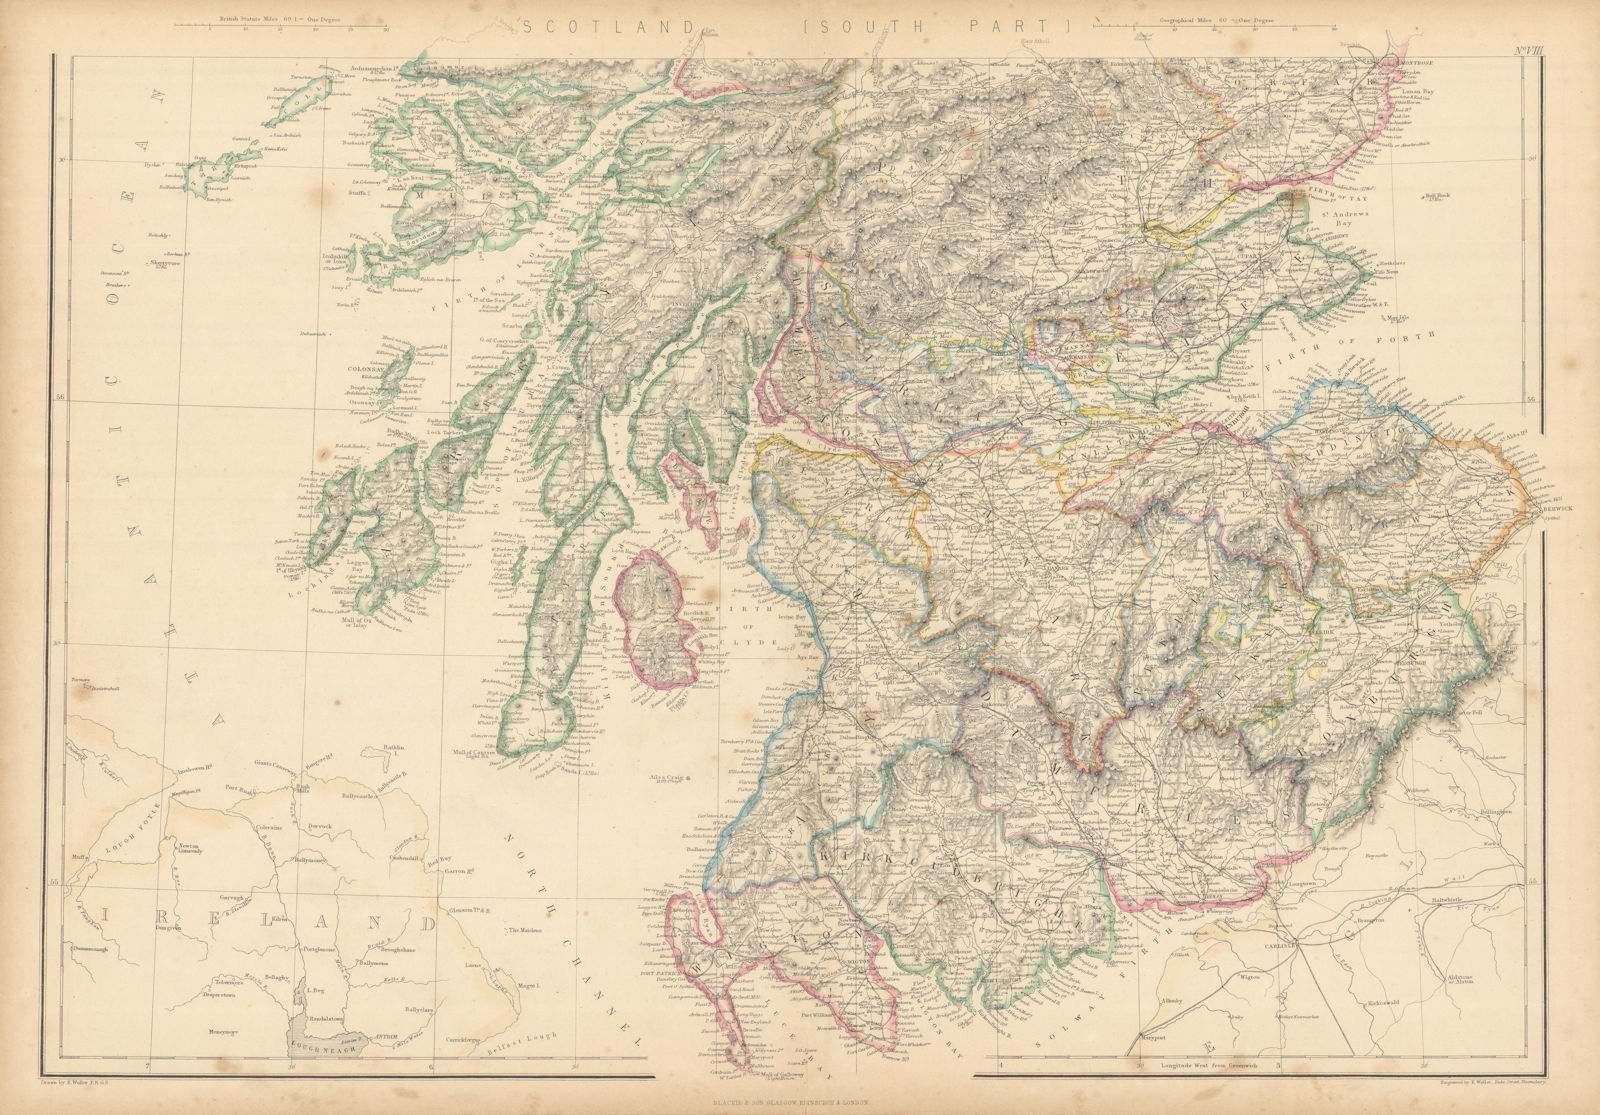 Associate Product Scotland (South) by Edward Weller. Borders Lothian Central Strathclyde 1859 map